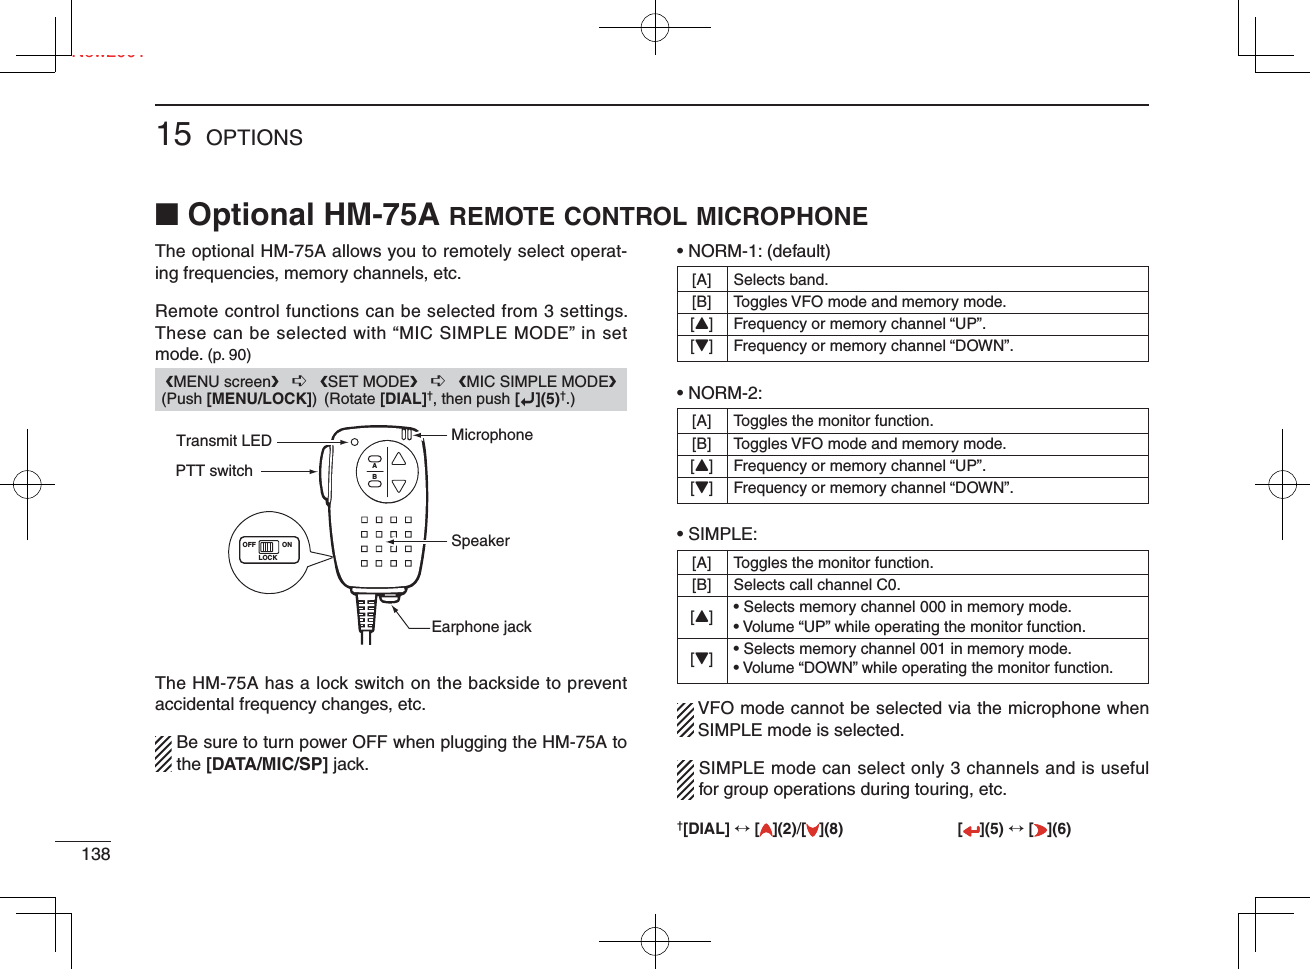 The optional HM-75A allows you to remotely select operat-ing frequencies, memory channels, etc. Remote control functions can be selected from 3 settings. These can be selected with “MIC SIMPLE MODE” in set mode. (p. 90)The HM-75A has a lock switch on the backside to prevent accidental frequency changes, etc.  Be sure to turn power OFF when plugging the HM-75A to the [DATA/MIC/SP] jack.• NORM-1: (default)• NORM-2: • SIMPLE:   VFO mode cannot be selected via the microphone when SIMPLE mode is selected.  SIMPLE mode can select only 3 channels and is useful for group operations during touring, etc.13815 OPTIONSNew2001■ Optional HM-75A REMOTE CONTROL MICROPHONE [A]  Selects band.  [B]  Toggles VFO mode and memory mode. [Y]  Frequency or memory channel “UP”. [Z]  Frequency or memory channel “DOWN”.  [A]  Toggles the monitor function.  [B]  Toggles VFO mode and memory mode. [Y]  Frequency or memory channel “UP”. [Z]  Frequency or memory channel “DOWN”.  [A]  Toggles the monitor function.  [B]  Selects call channel C0. [Y]  • Selects memory channel 000 in memory mode.    • Volume “UP” while operating the monitor function. [Z]  • Selects memory channel 001 in memory mode.   •  Volume “DOWN” while operating the monitor function.❮MENU screen❯   ➪   ❮SET MODE❯   ➪   ❮MIC SIMPLE MODE❯ (Push [MENU/LOCK]) (Rotate [DIAL]†, then push [ï](5)†.)AOFF ONLOCKBPTT switchTransmit LEDEarphone jackMicrophoneSpeaker†[DIAL] ↔ [ ](2)/[](8) [ ](5) ↔ [ ](6)Ne